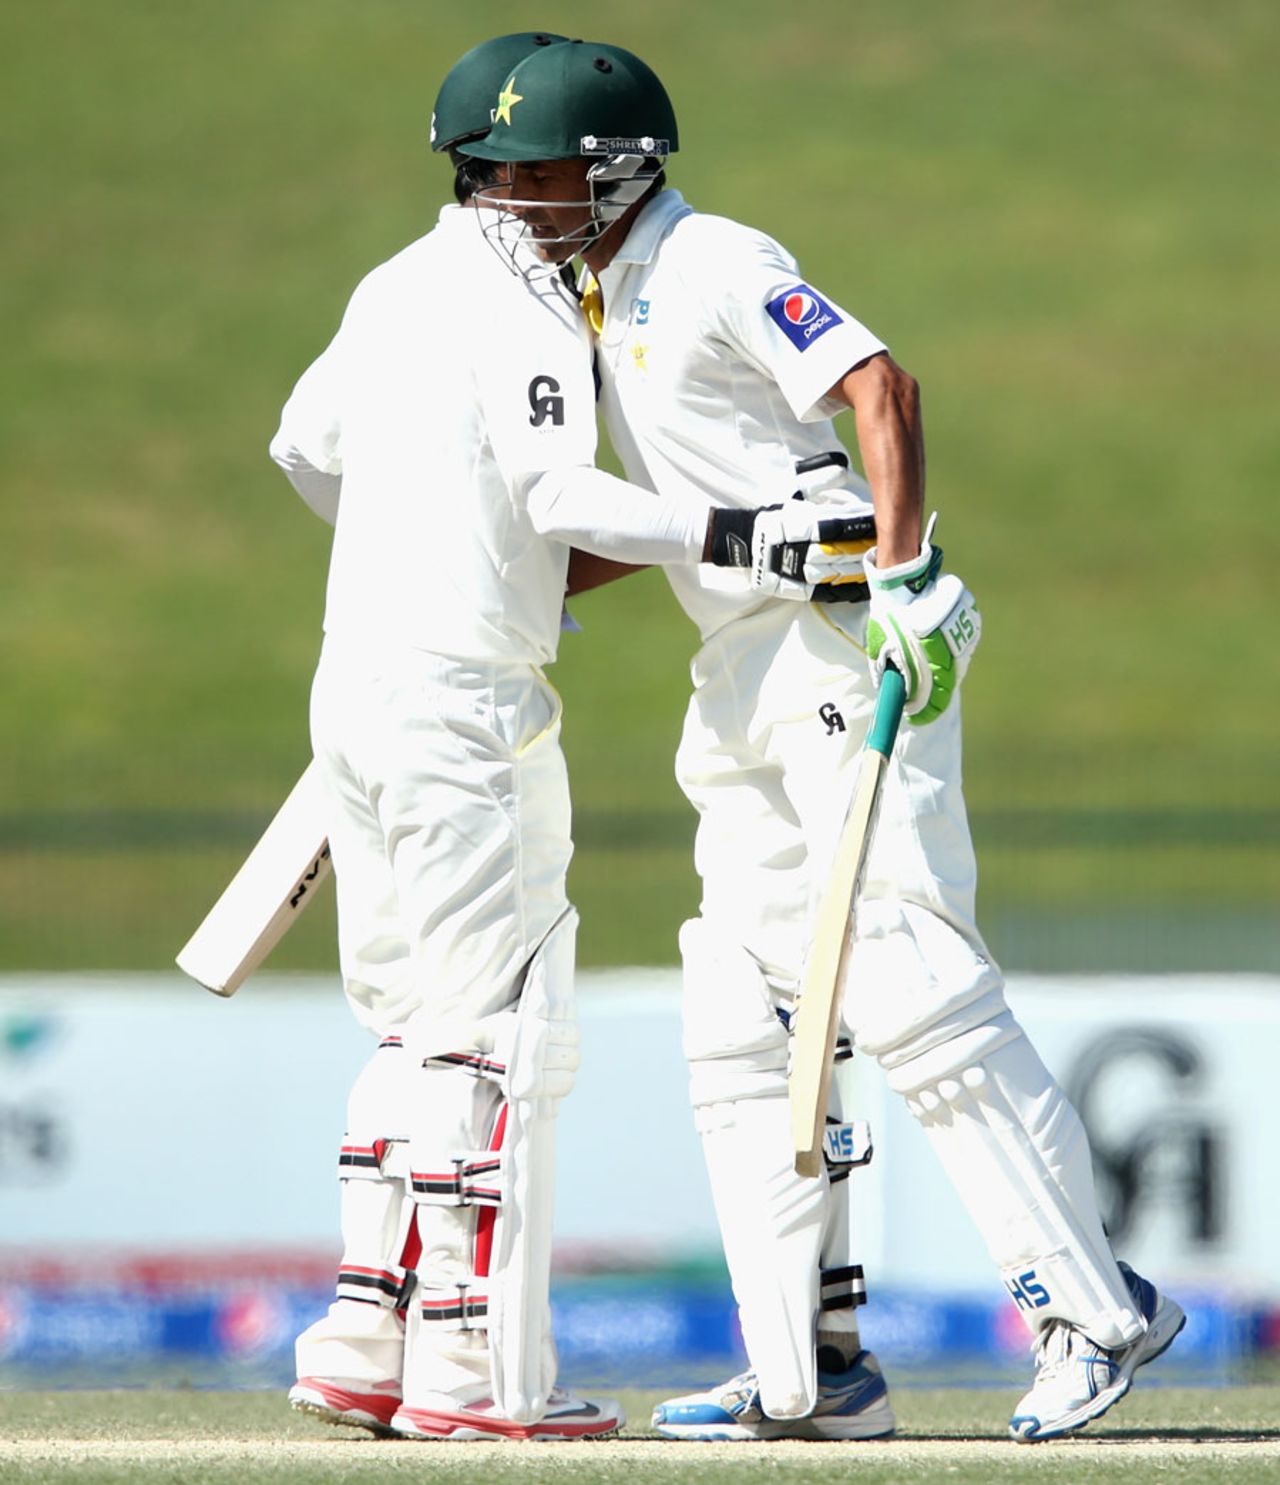 Younis Khan and Mohammad Hafeez stretched Pakistan's lead past 400 before lunch, Pakistan v New Zealand, 1st Test, Abu Dhabi, 4th day, November 12, 2014